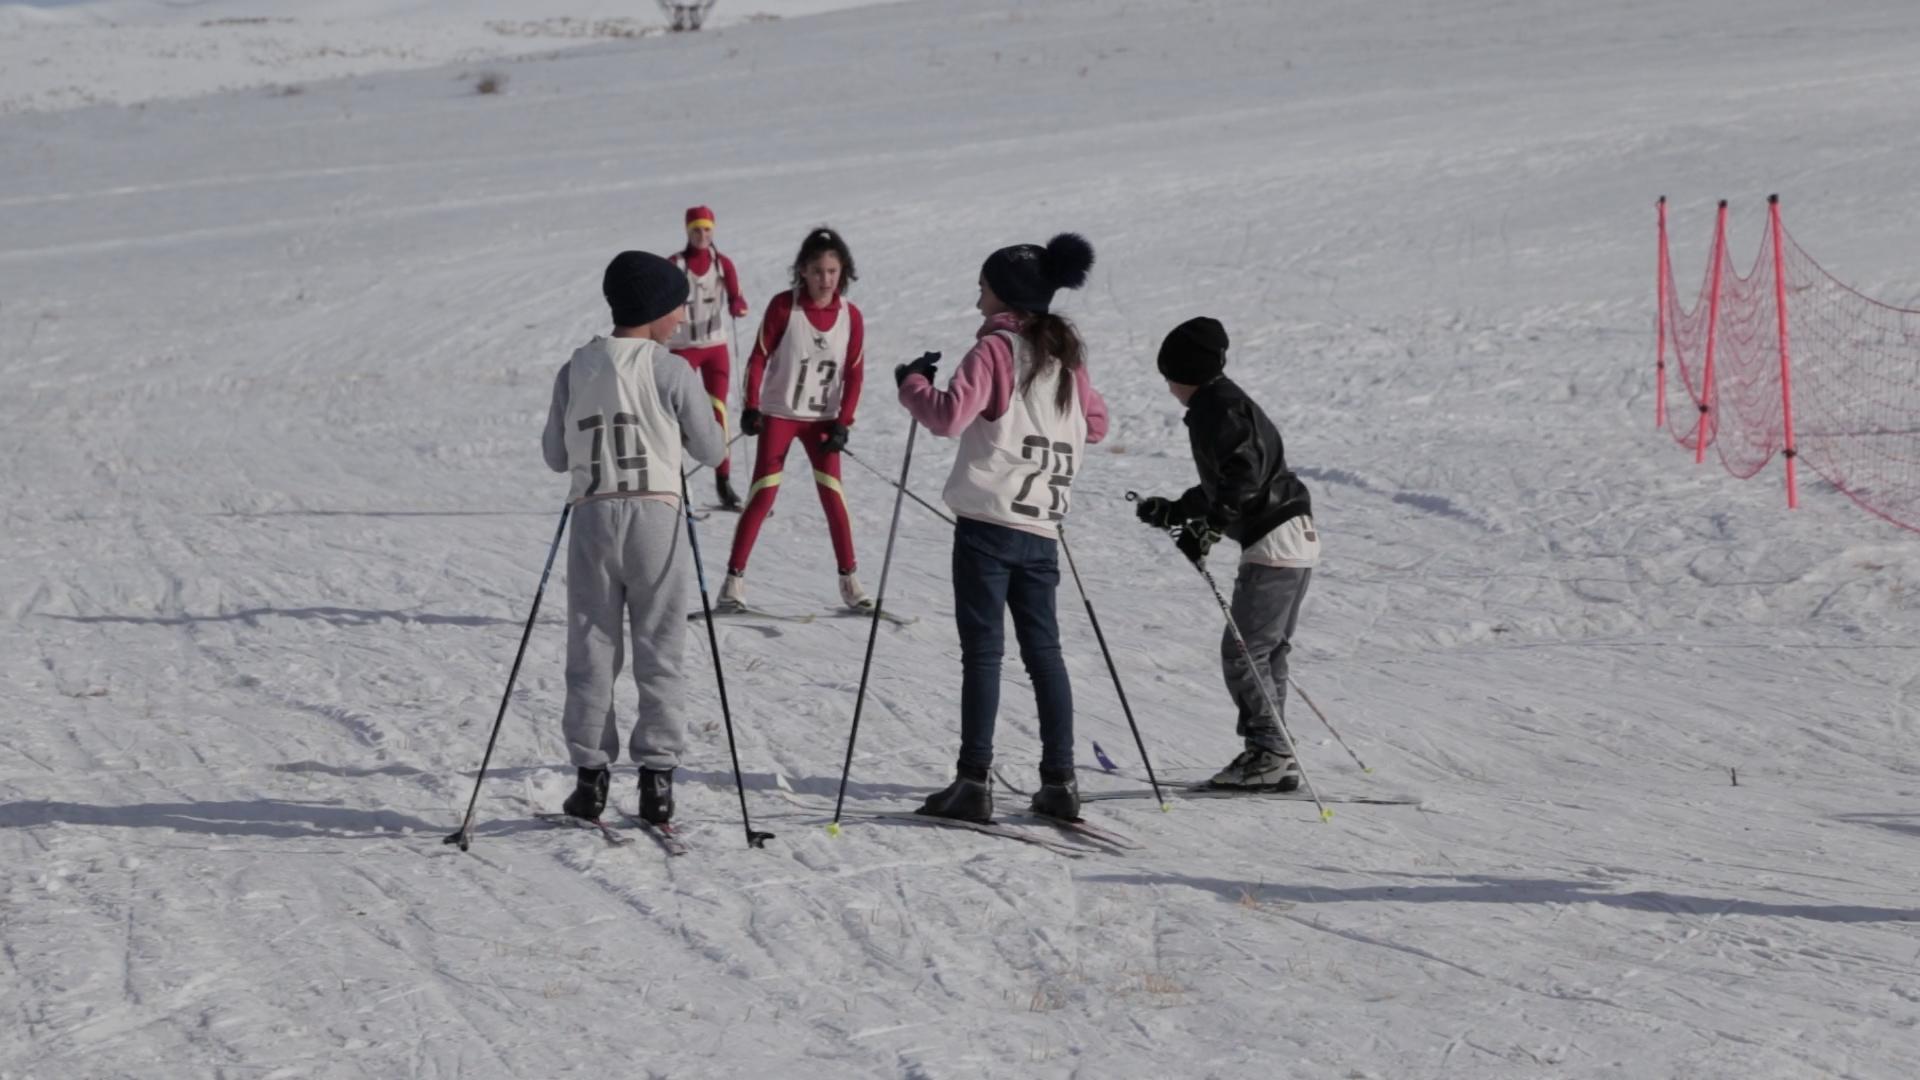 Winter Sports and Ecotourism Are Trending in Armenia